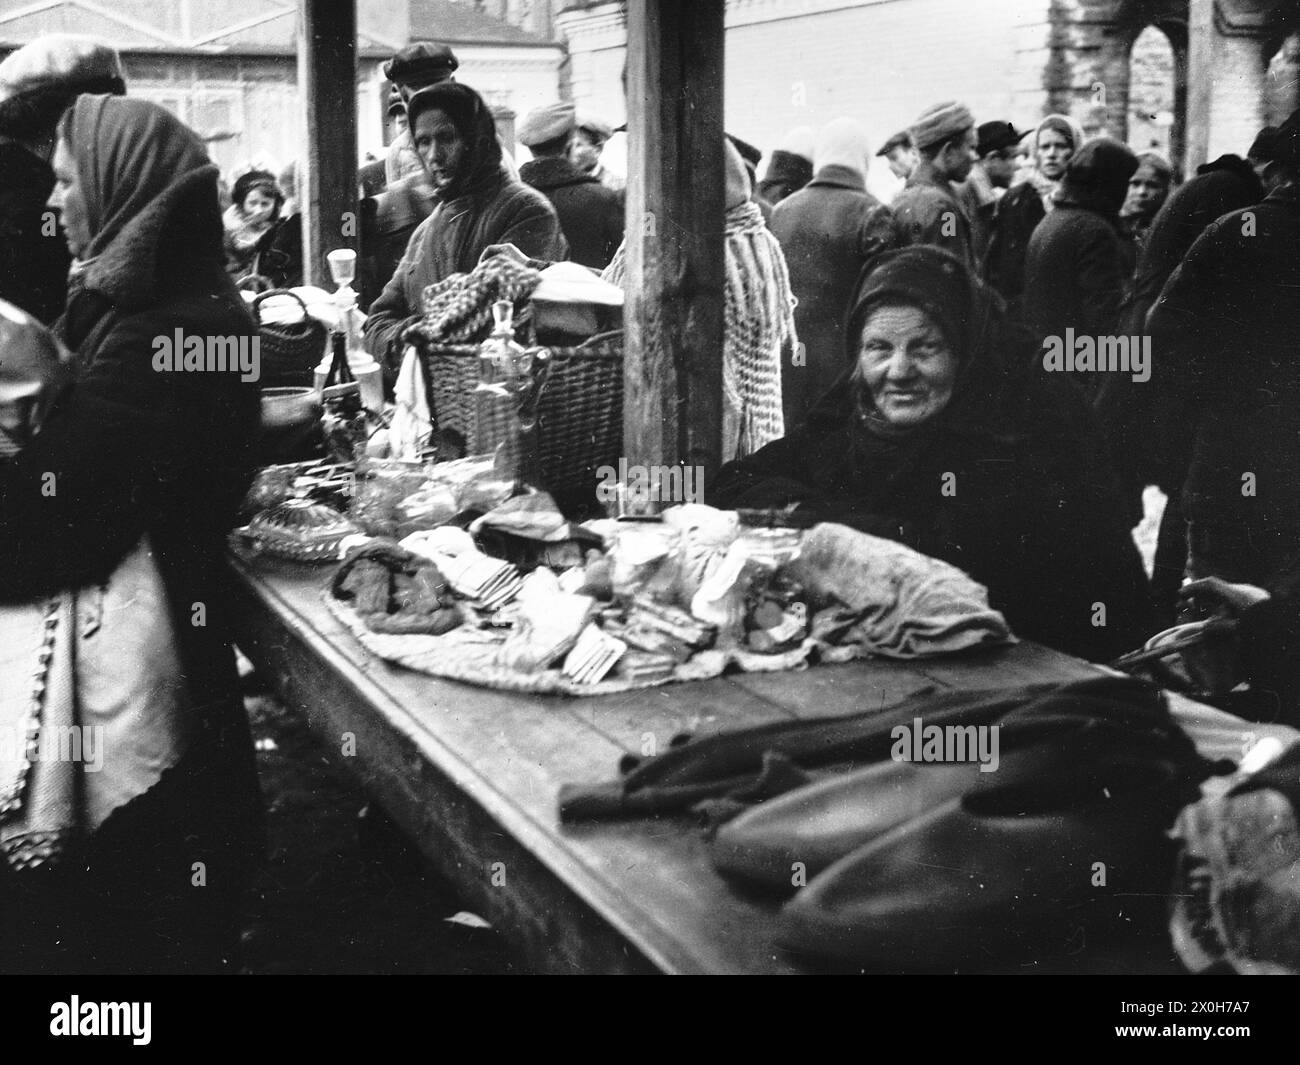 An old woman offers her belongings in a covered market stall. Around her are other vendors and market visitors. The picture was taken by a member of the Radfahrgrenadierregiment 2 / Radfahrsicherungsregiment 2, on the eastern front. [automated translation] Stock Photo